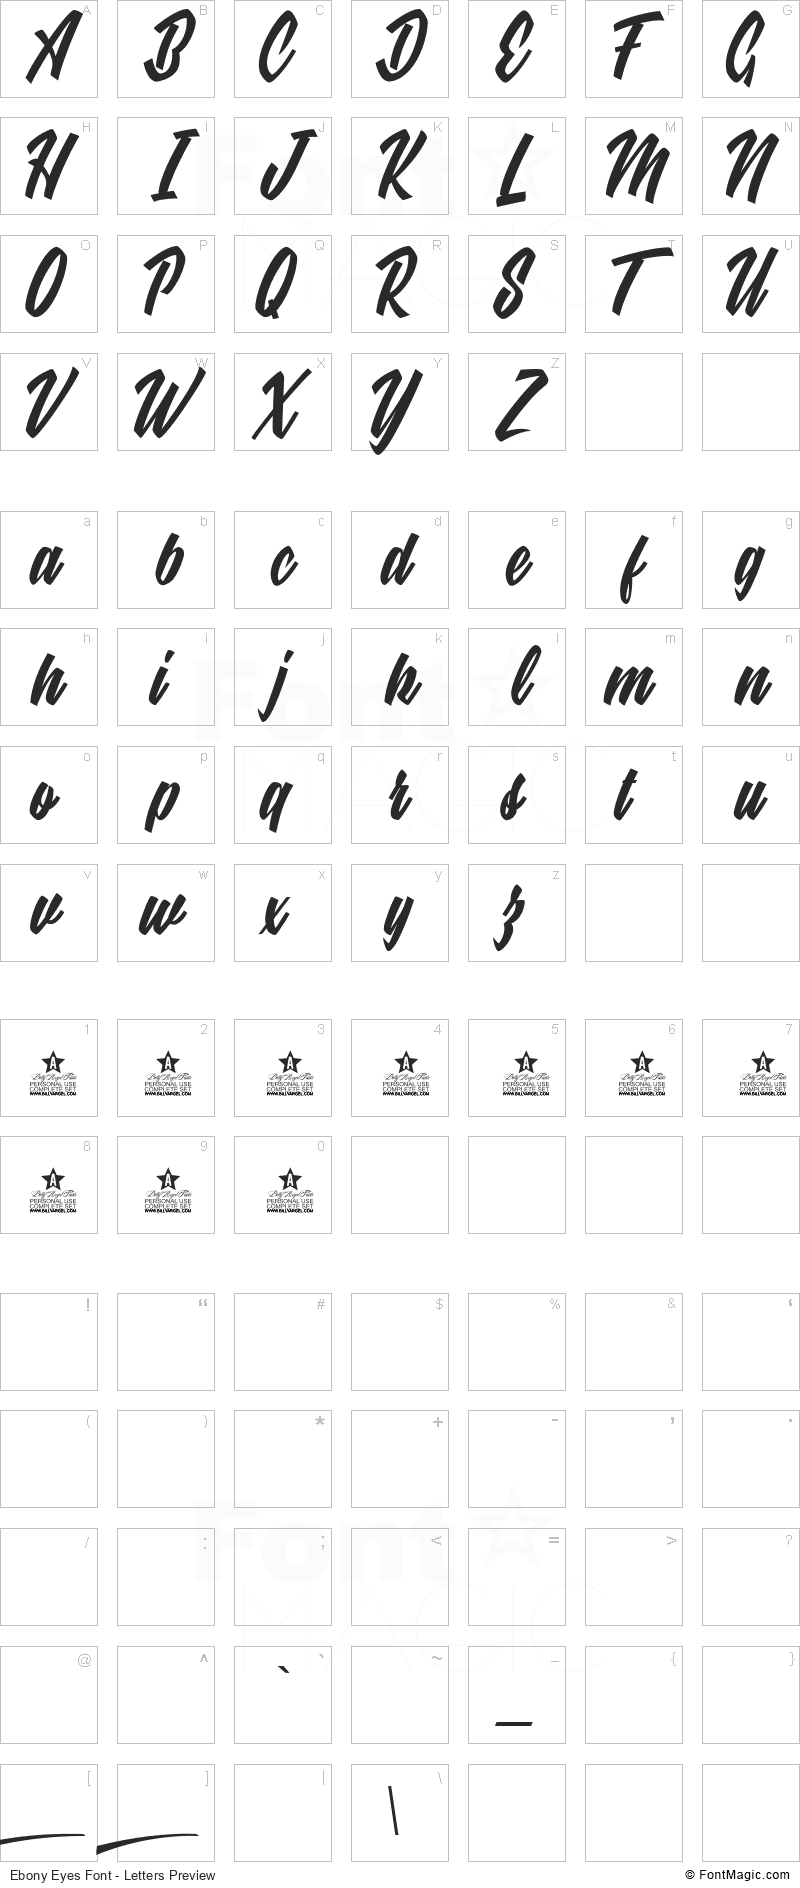 Ebony Eyes Font - All Latters Preview Chart